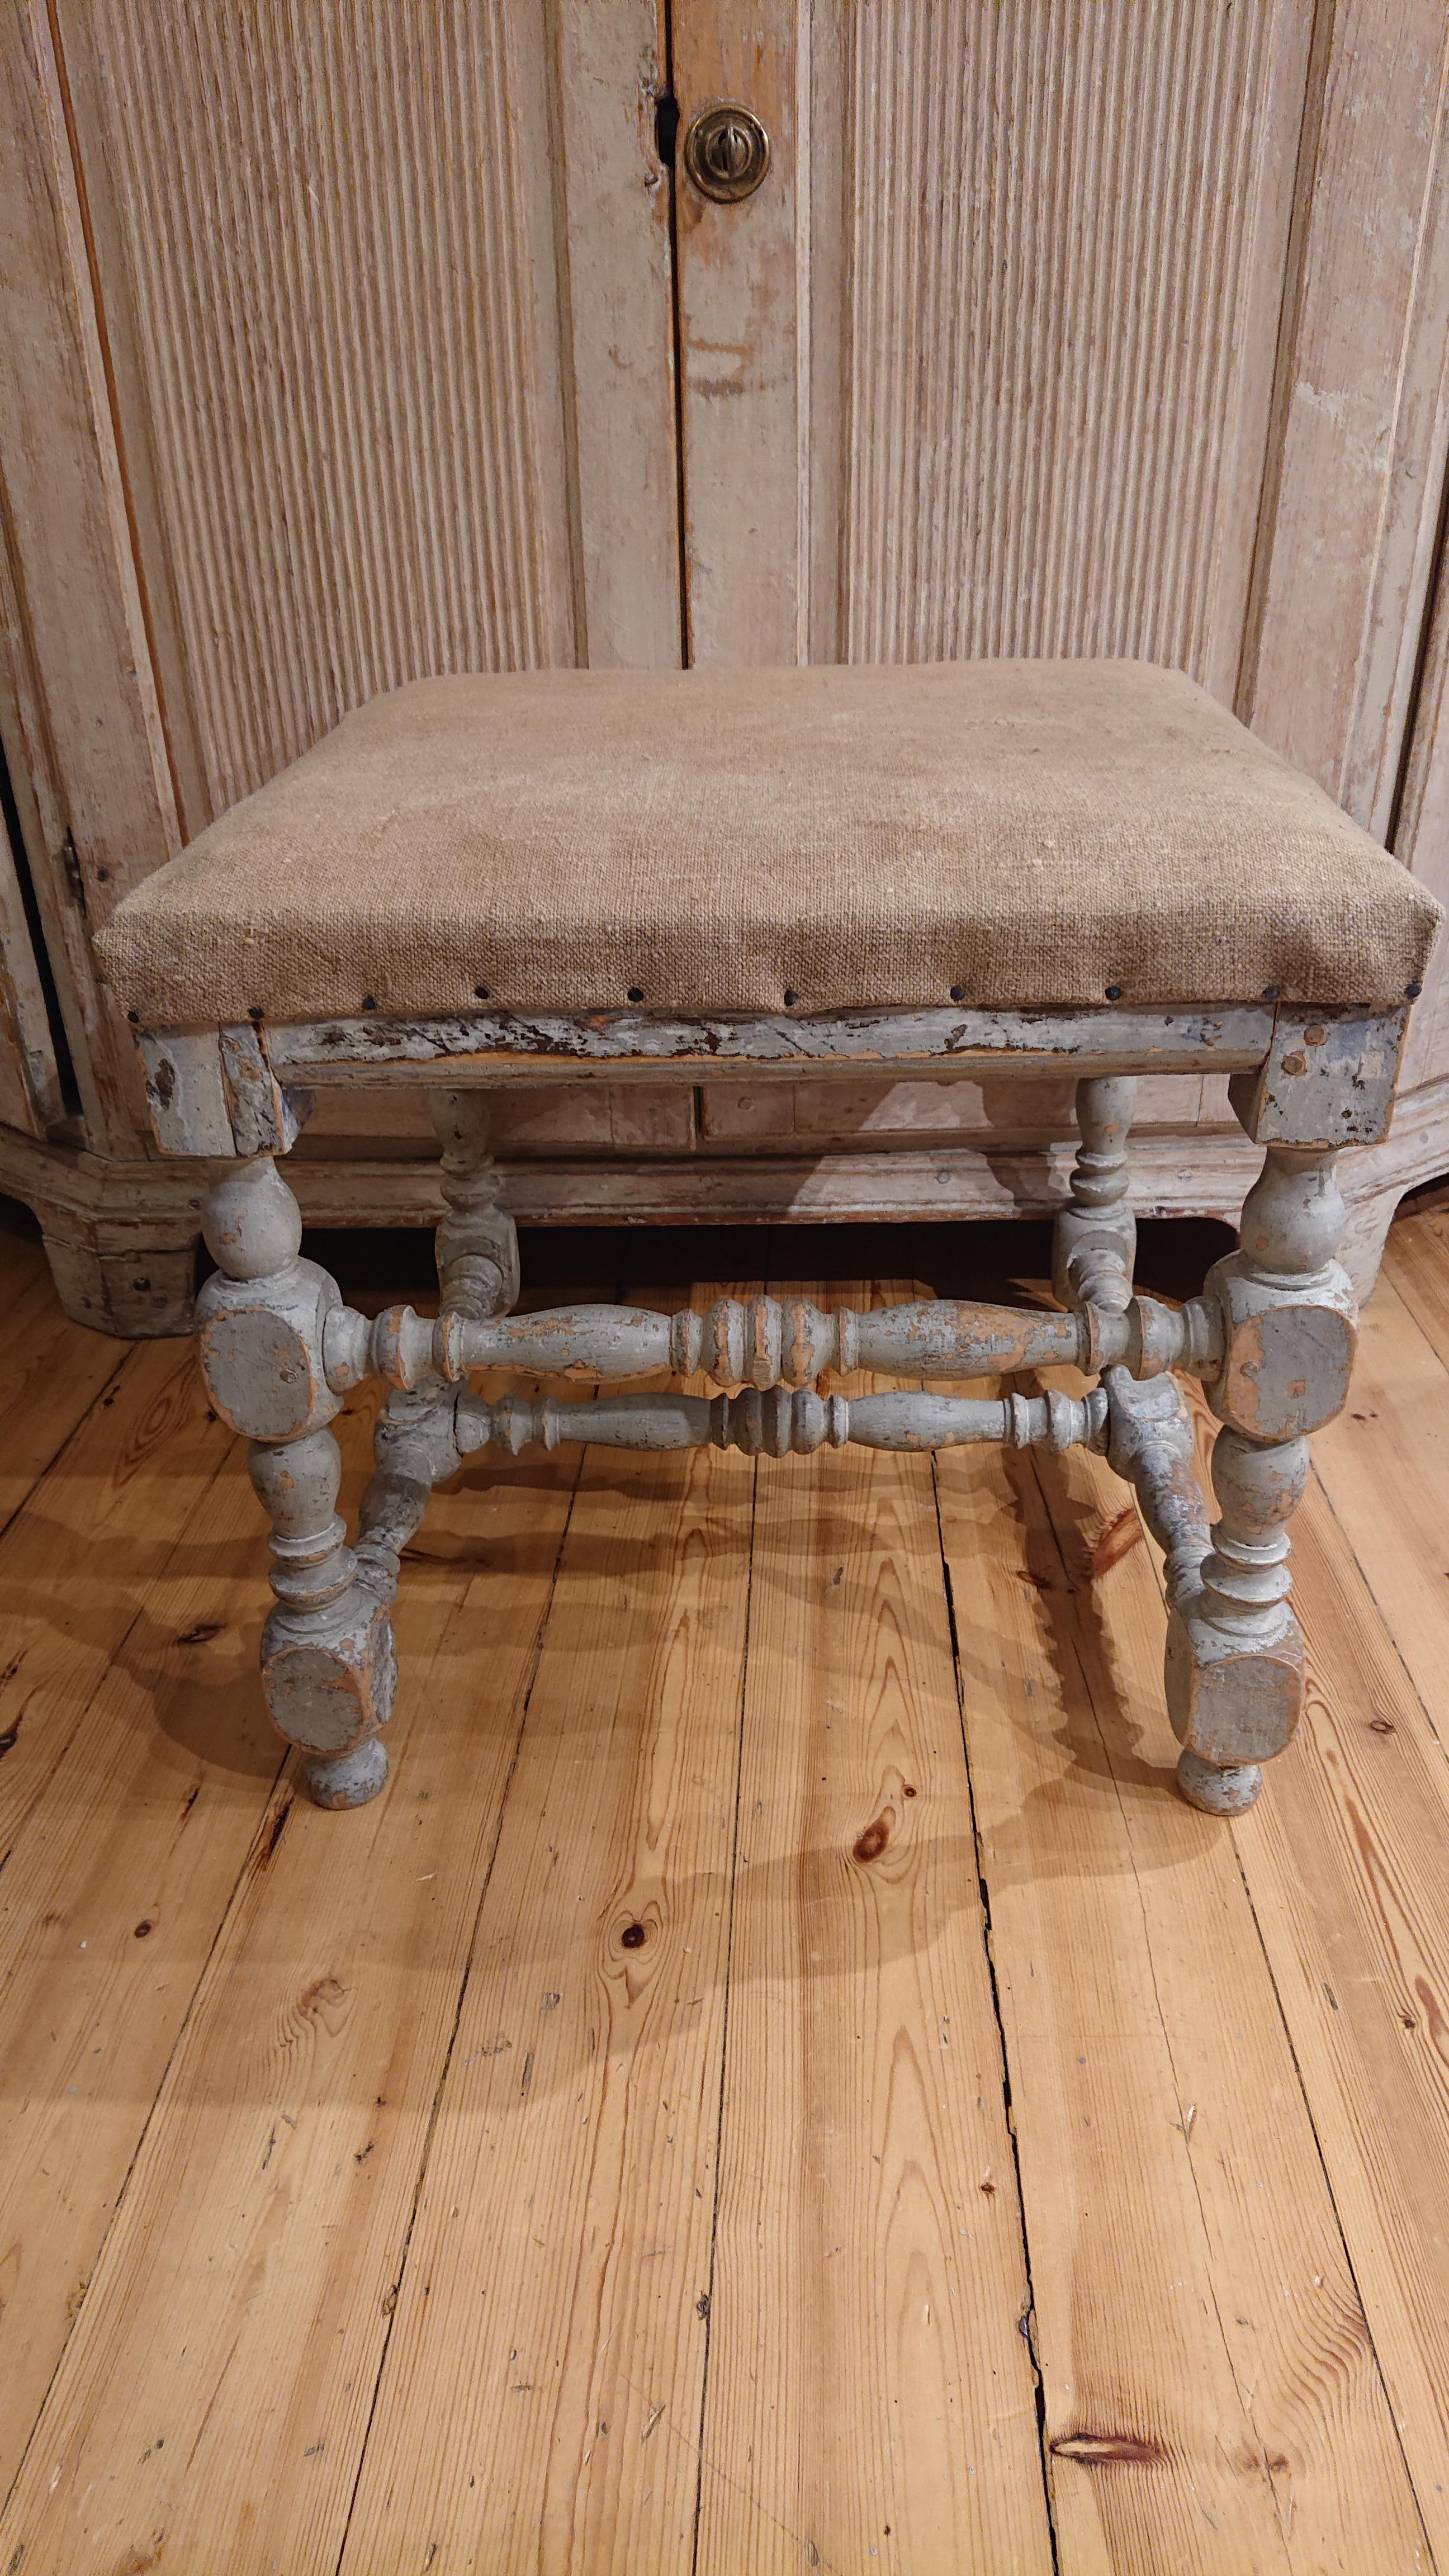 18th Century Swedish Baroque Stool from Sundsvall Medelpad, Northern Sweden .
Very nice & genuine Baroque stool.
Fine turned legs.
Scraped by hand to its original paint.
Fantastic patina & beautiful color.
Solid frame & stable in